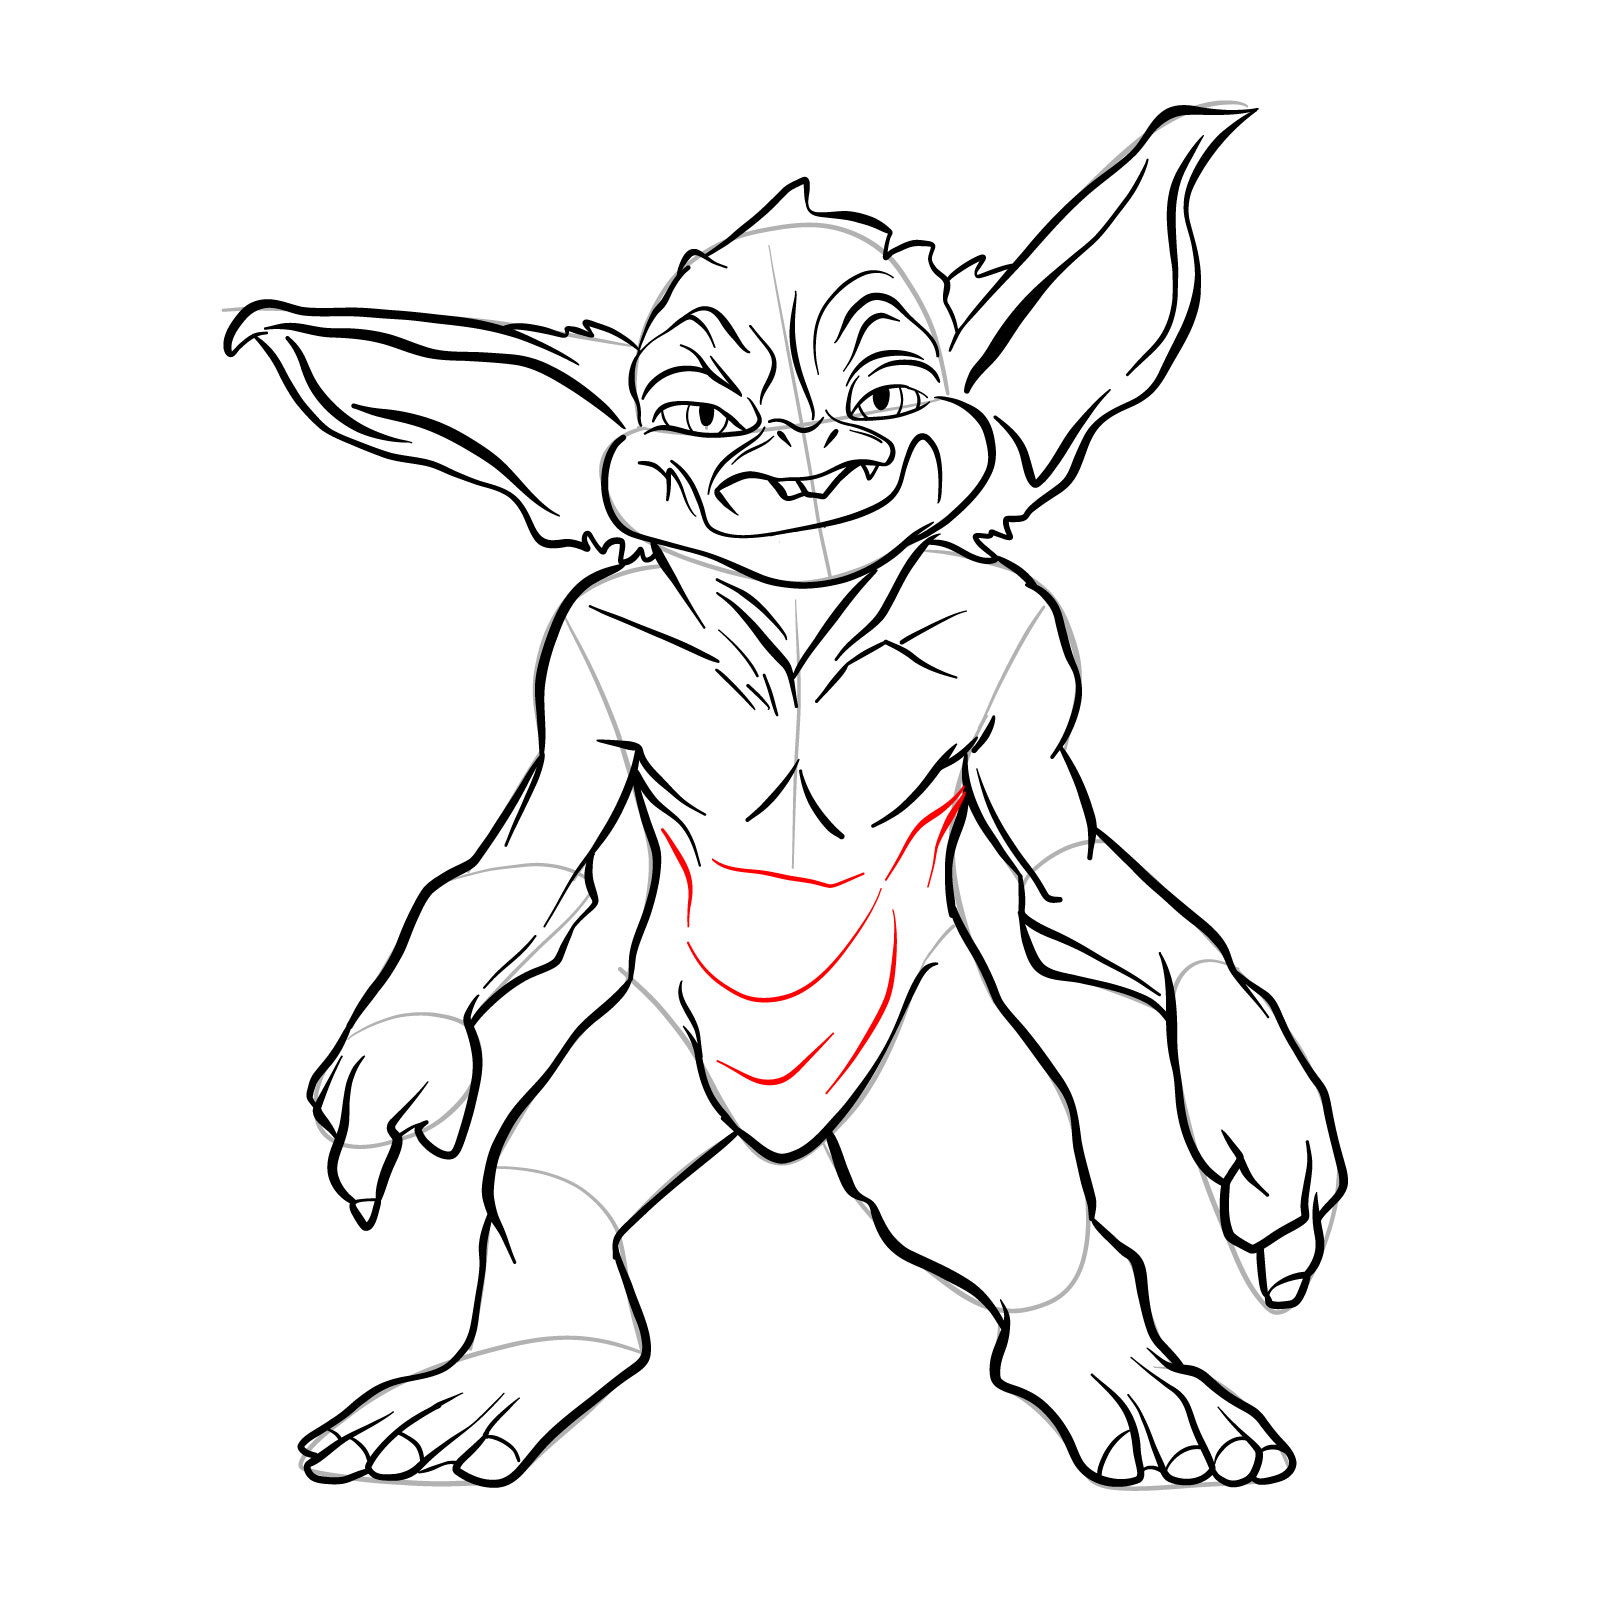 How to draw a Goblin - step 30